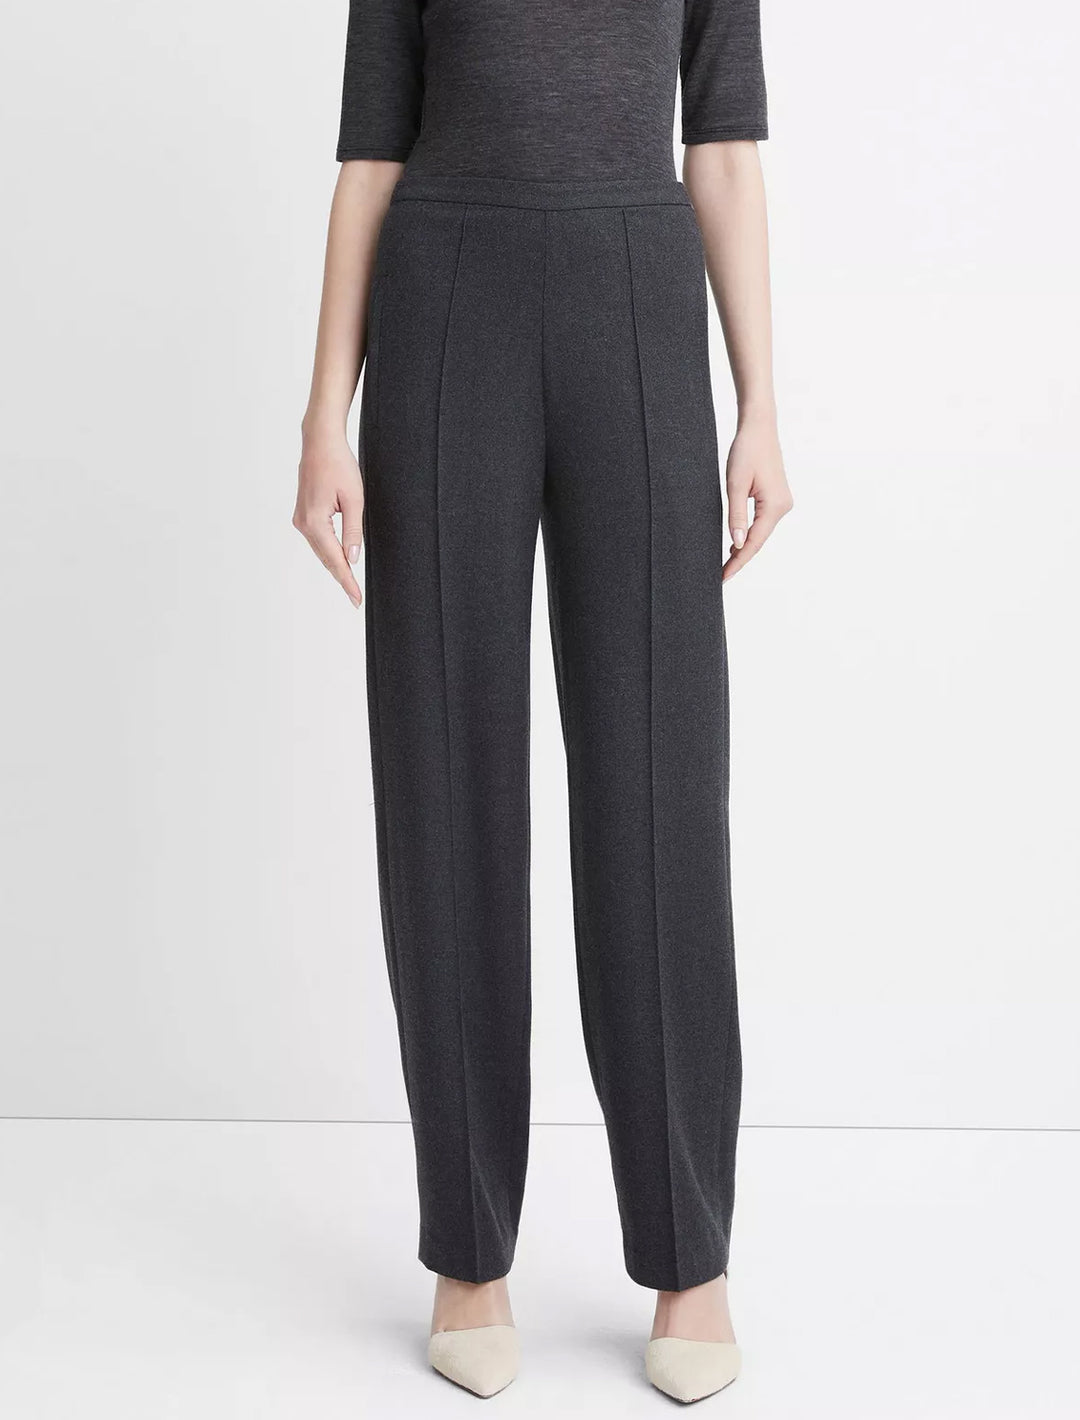 Model wearing Vince's charcoal mid rise wide leg pant.